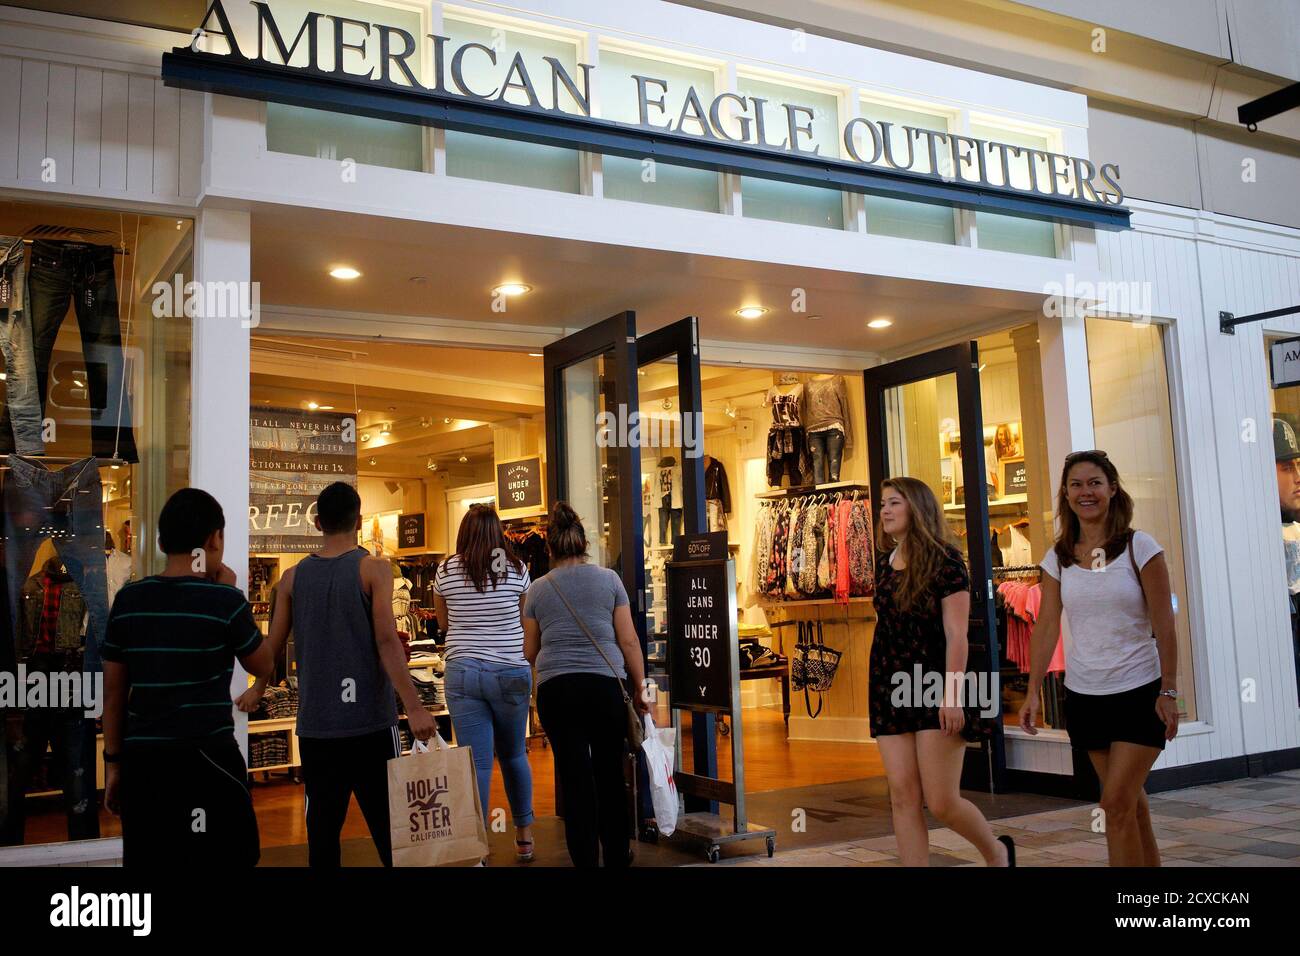 Shoppers enter the American Eagle Outfitters store in Broomfield, Colorado August 20, 2014. American Eagle Outfitters was a bright spot in the retail sector Wednesday after the teen-oriented chain's second-quarter results beat expectations and forecasts for third-quarter earnings were in line with the current estimate. Its stock jumped 12 percent to $12.98.  REUTERS/Rick Wilking (UNITED STATES - Tags: BUSINESS) Stock Photo